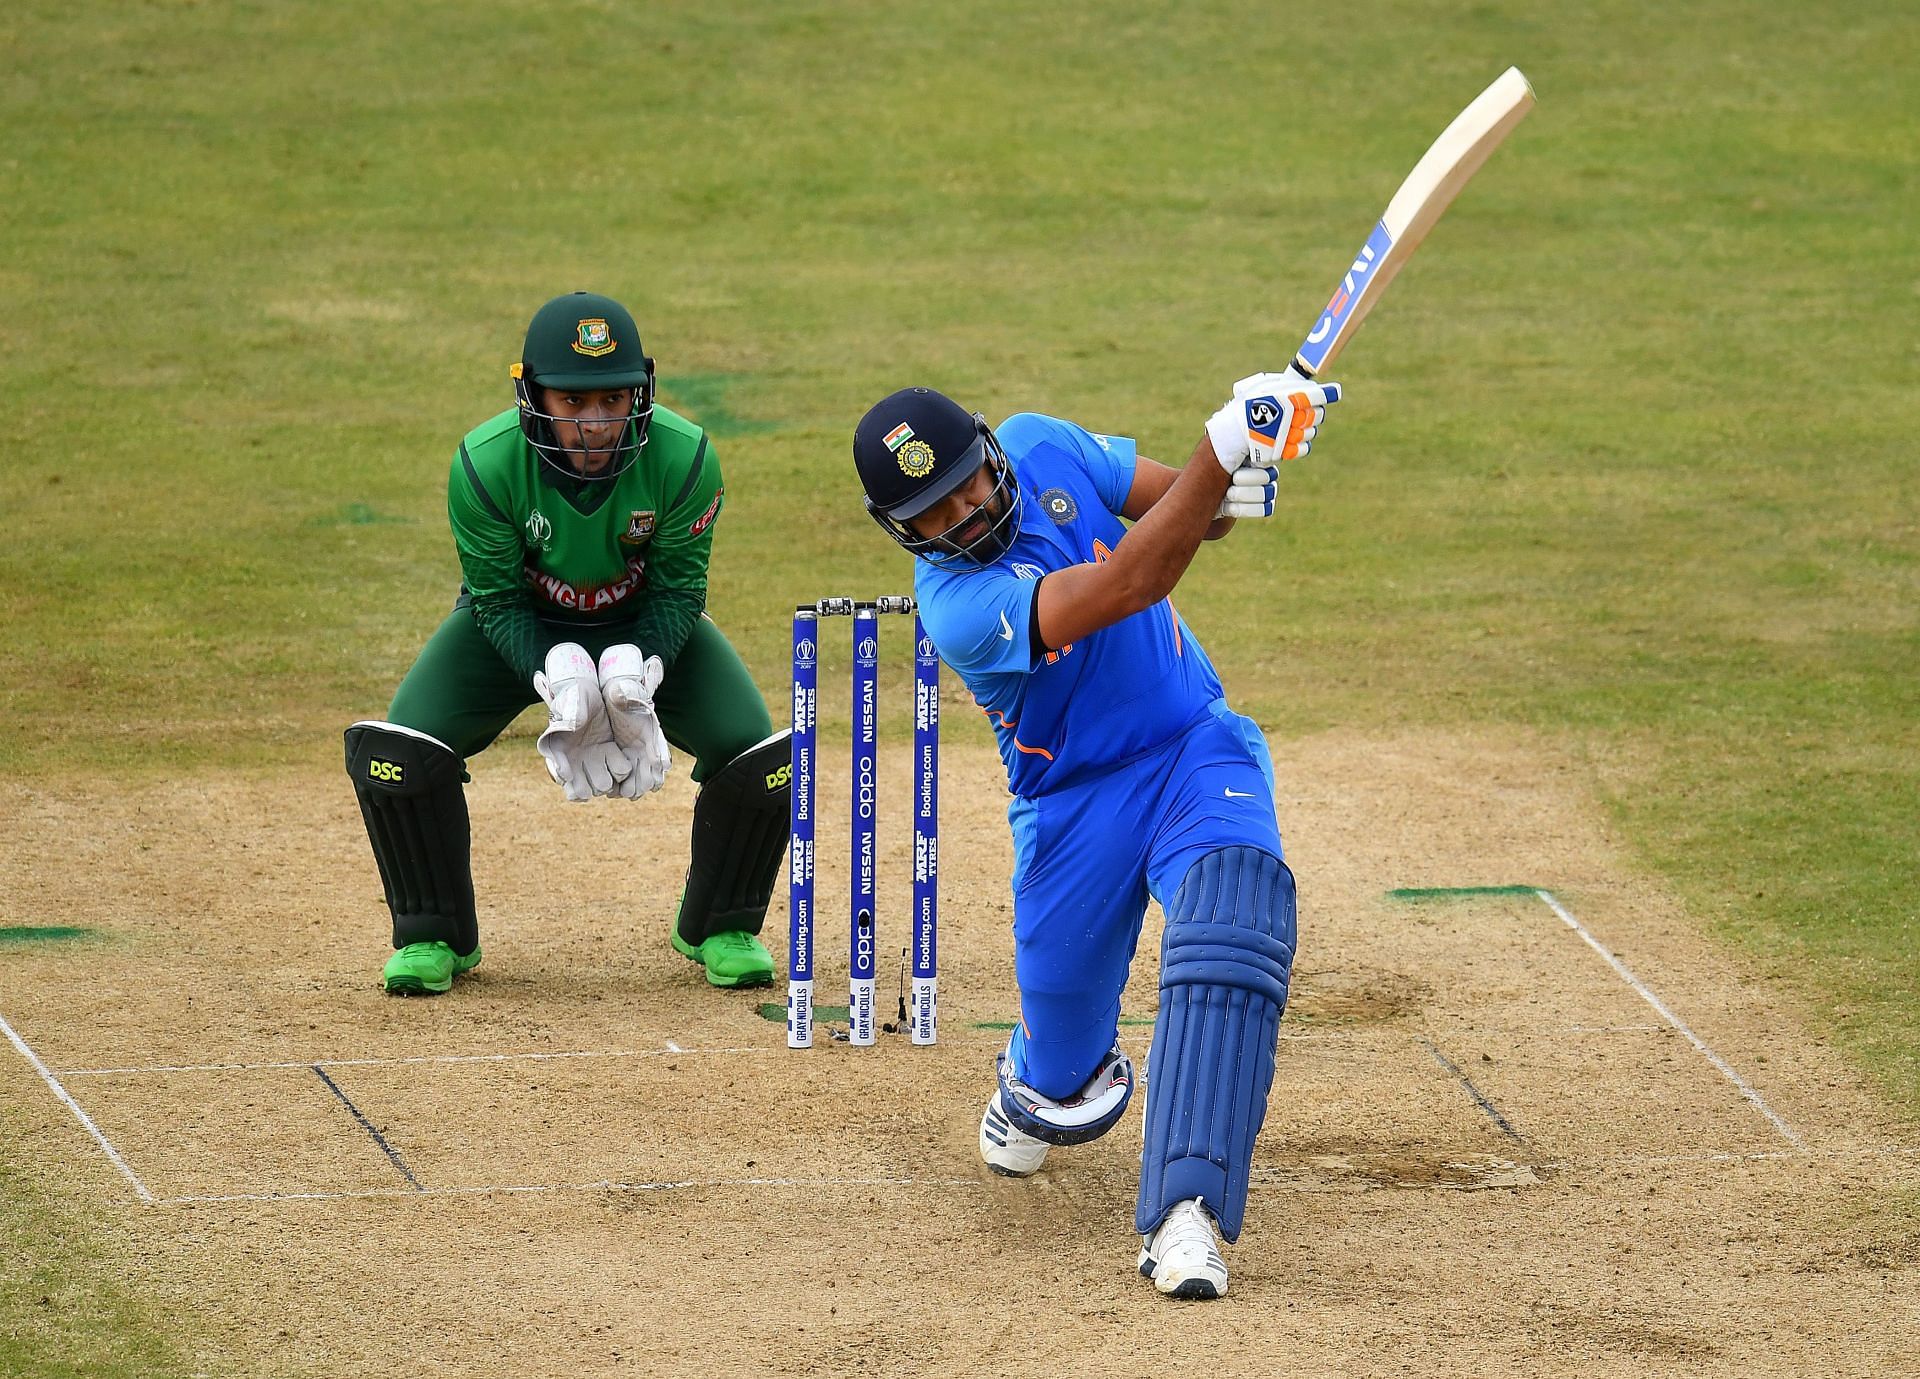 Rohit Sharma batting during the 2019 World Cup against Bangladesh. Pic: Getty Images